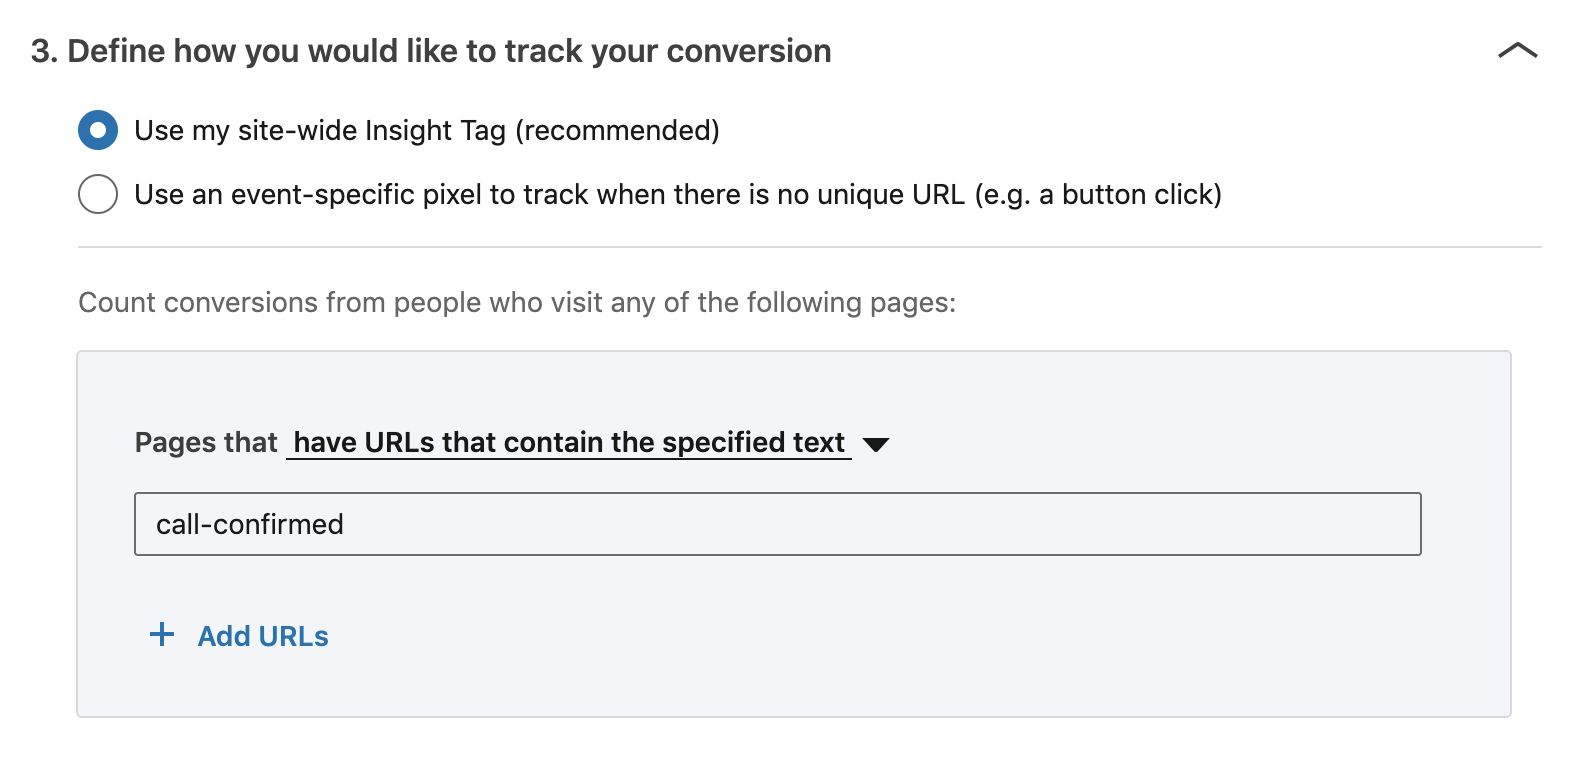 Setting a conversion URL by site-wide Insight Tag